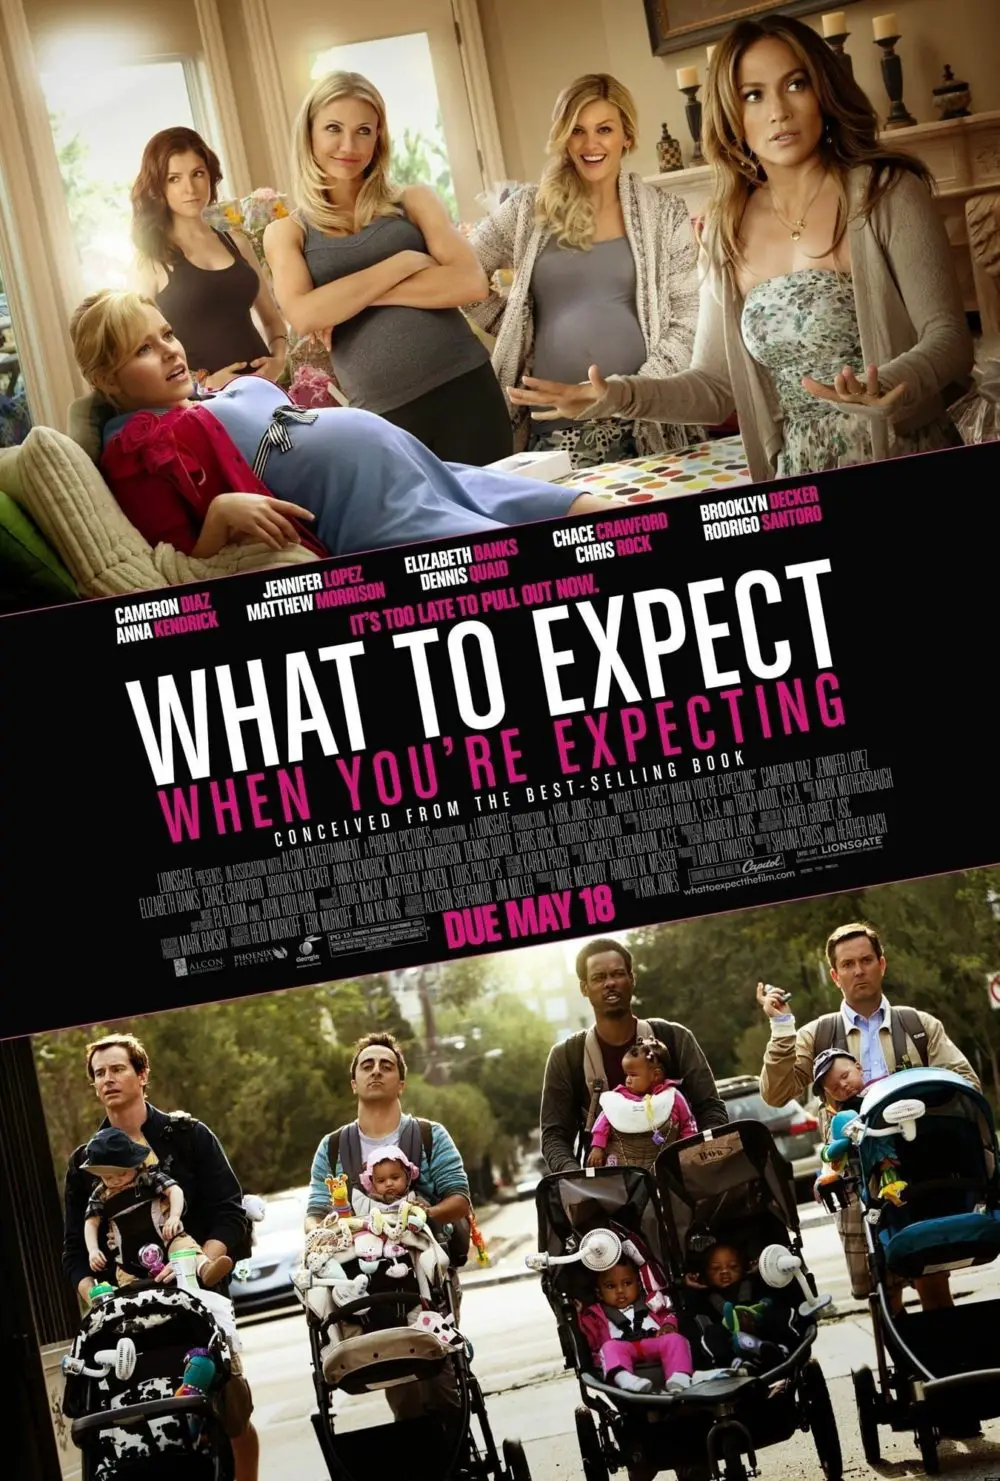 You are currently viewing What to Expect When You’re Expecting